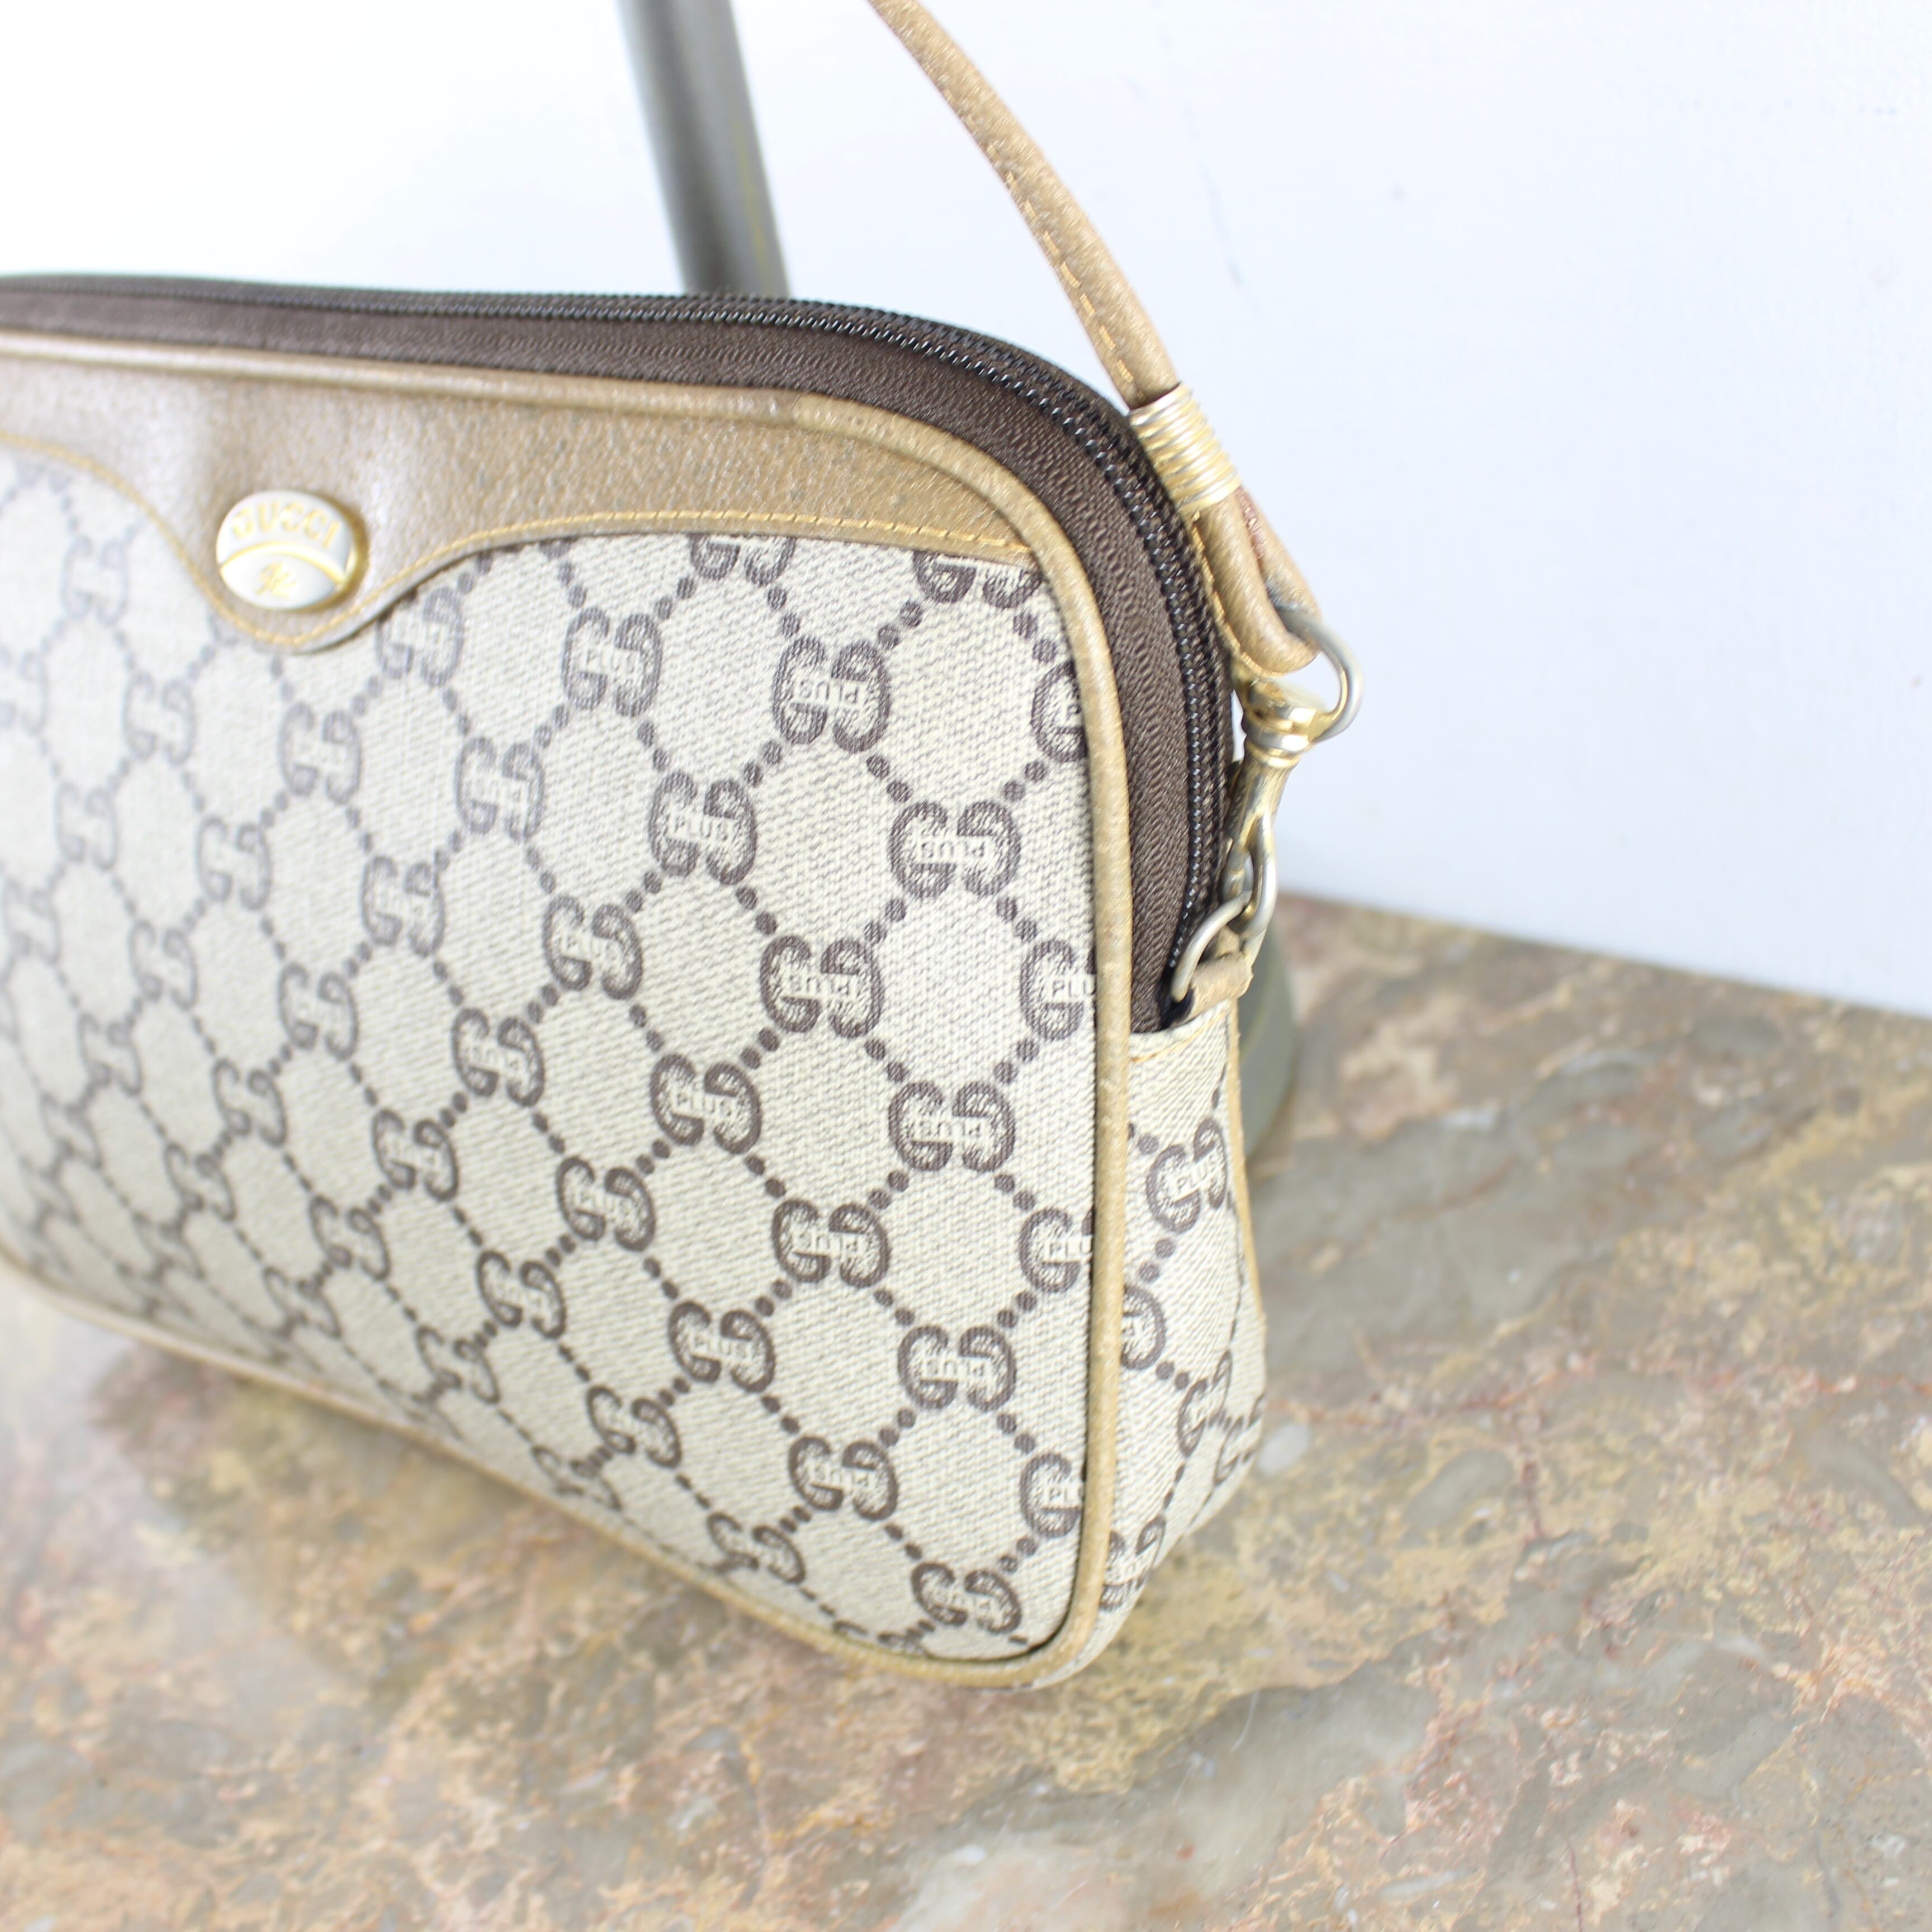 ◎.OLD GUCCI PLUS GG PATTERNED SHOULDER BAG MADE IN  ITALY/オールドグッチプラスGG柄ショルダーバッグ2000000052823 | Titti Clothing